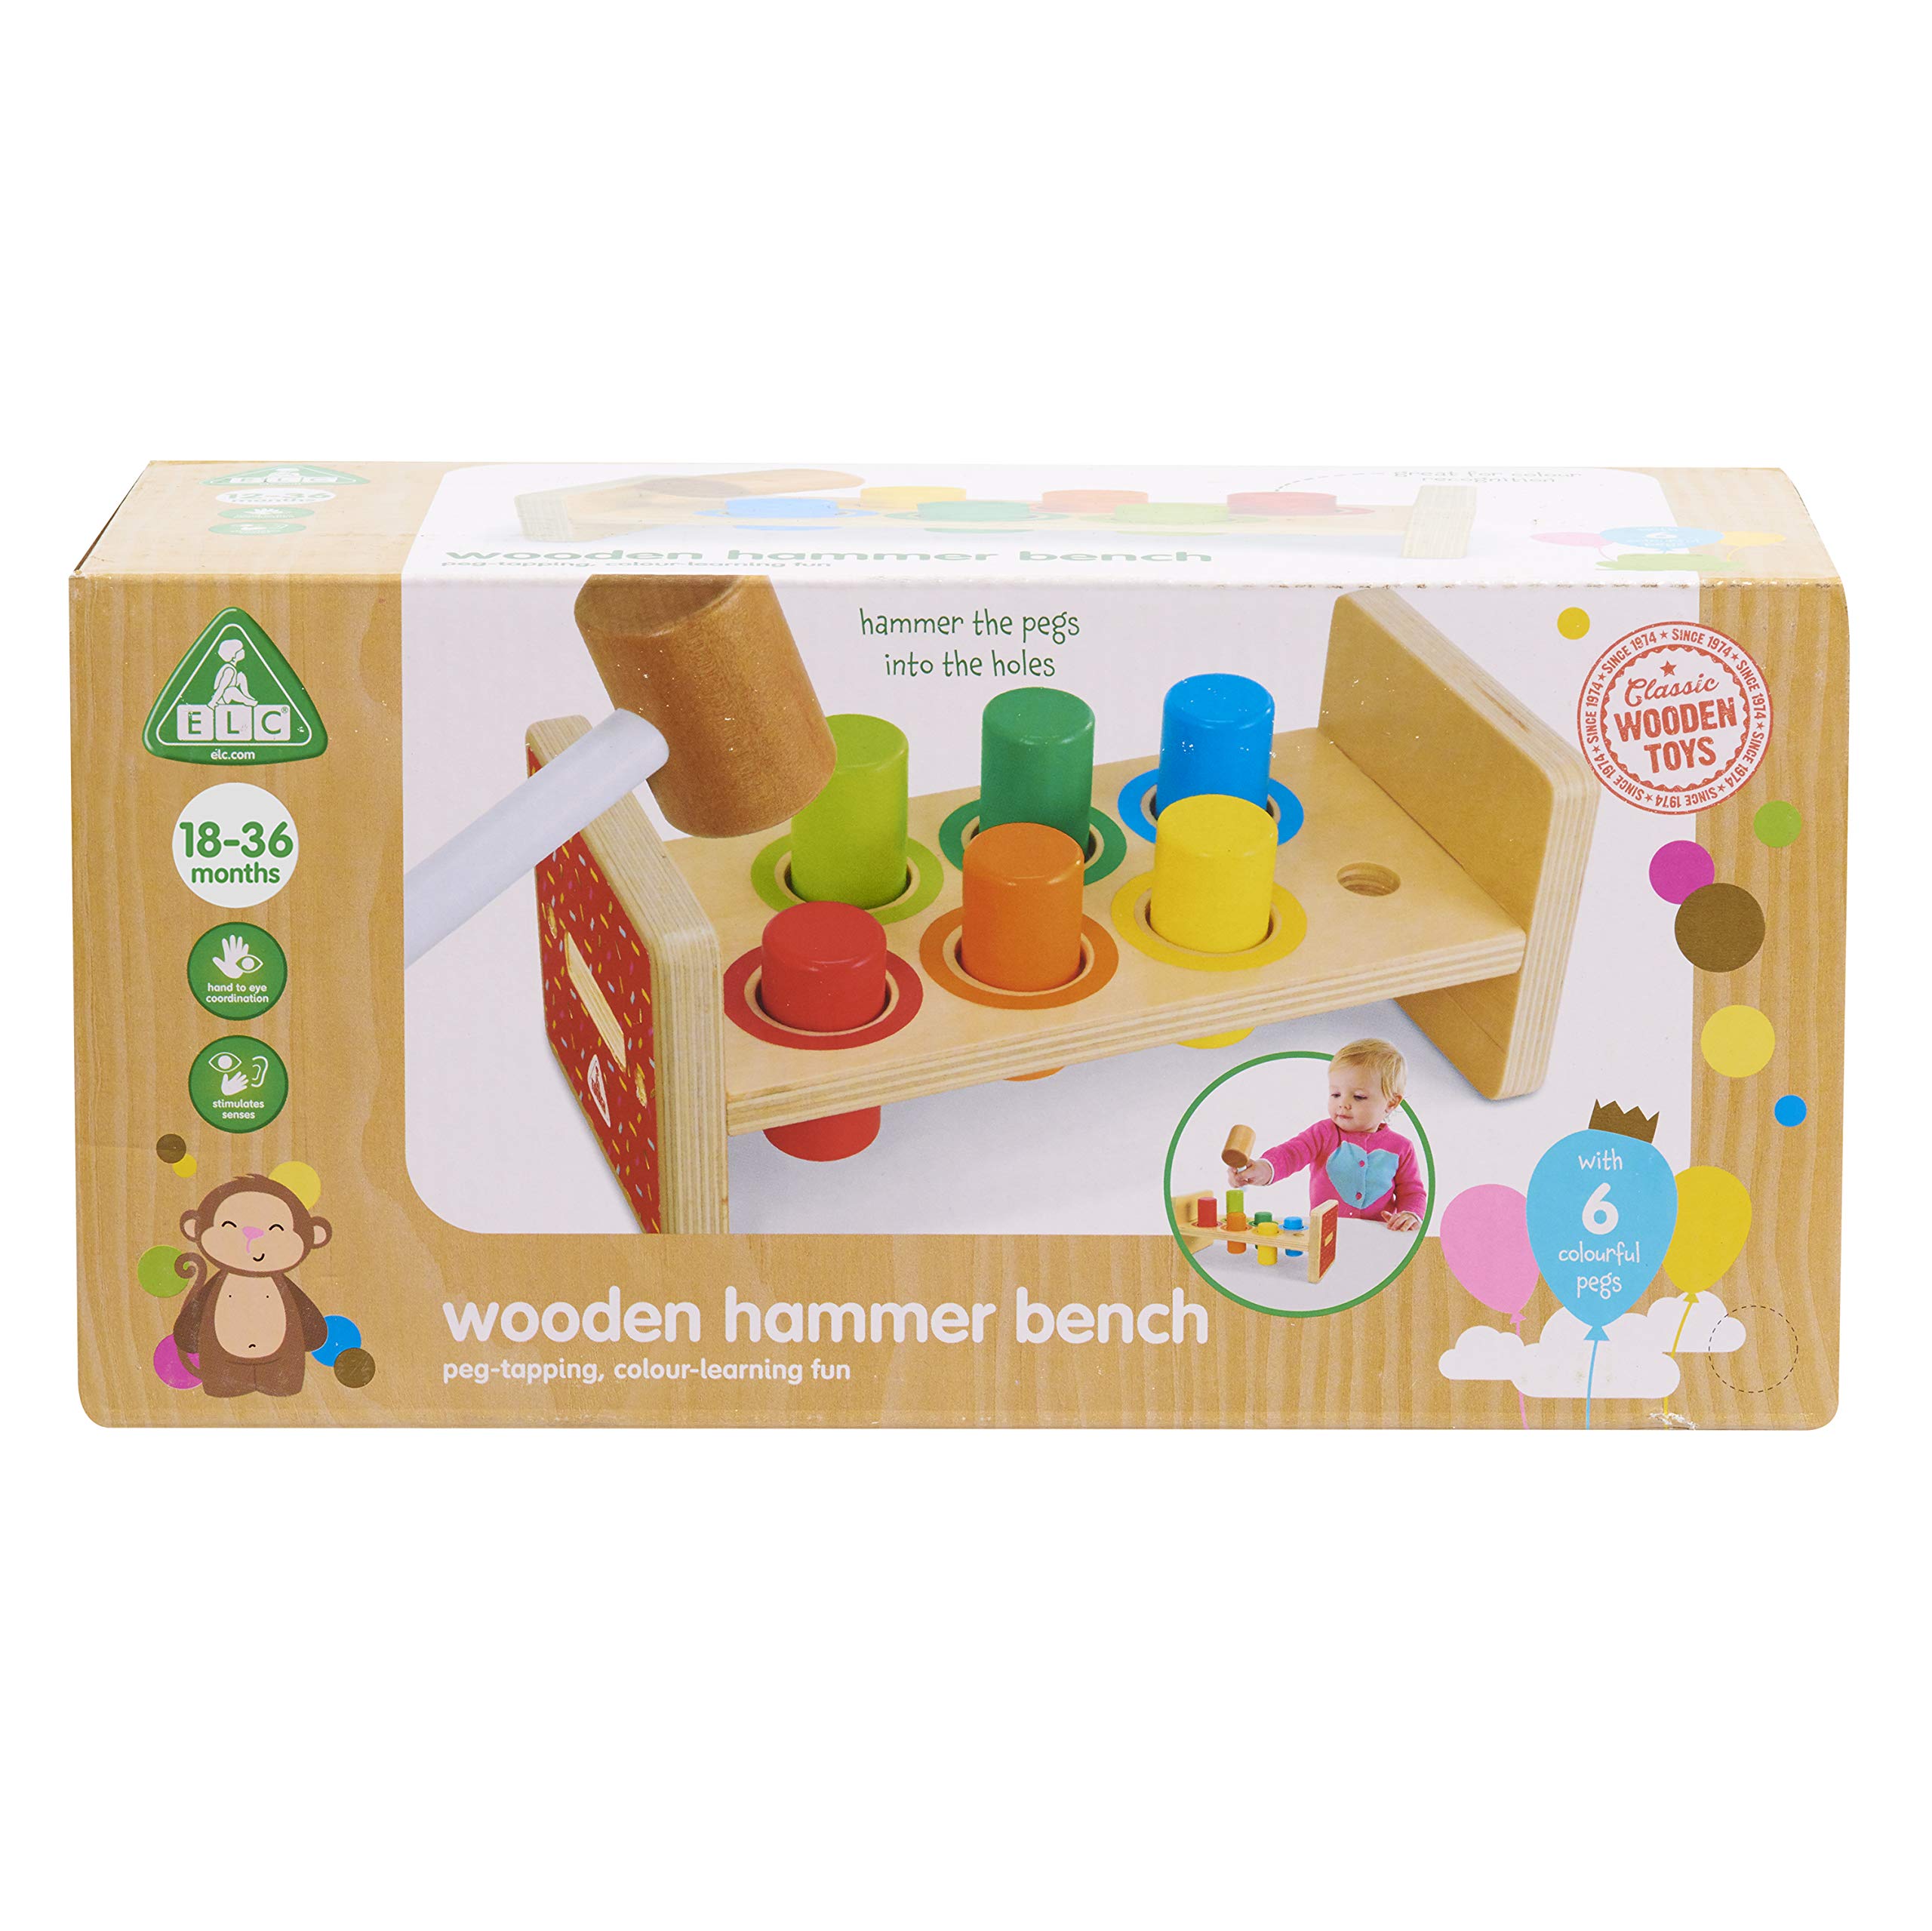 Early Learning Centre Wooden Hammer Bench, Hand Eye Coordination, Stimulates Senses,, Kids Toys for Ages 18 Month, Gifts and Presents, Amazon Exclusive